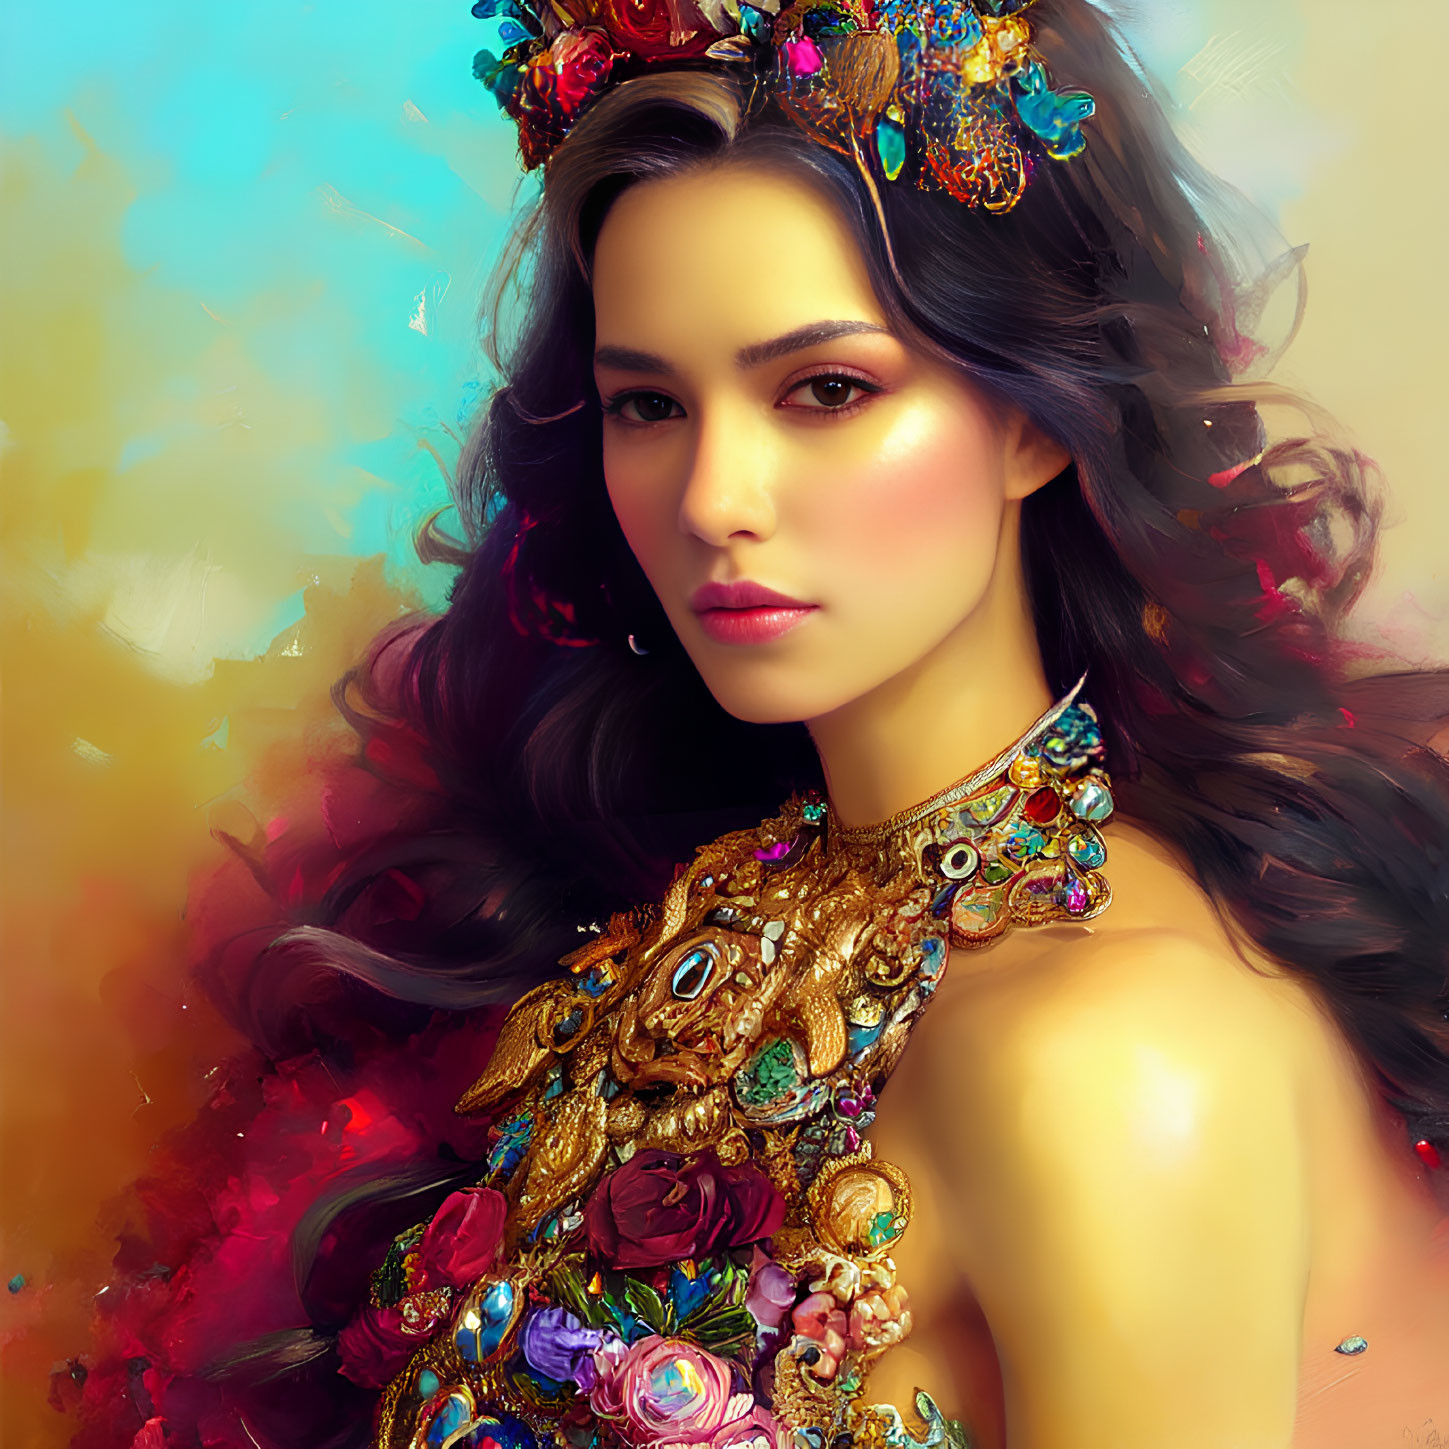 Woman's portrait with dark hair, jeweled crown & collar on pastel background